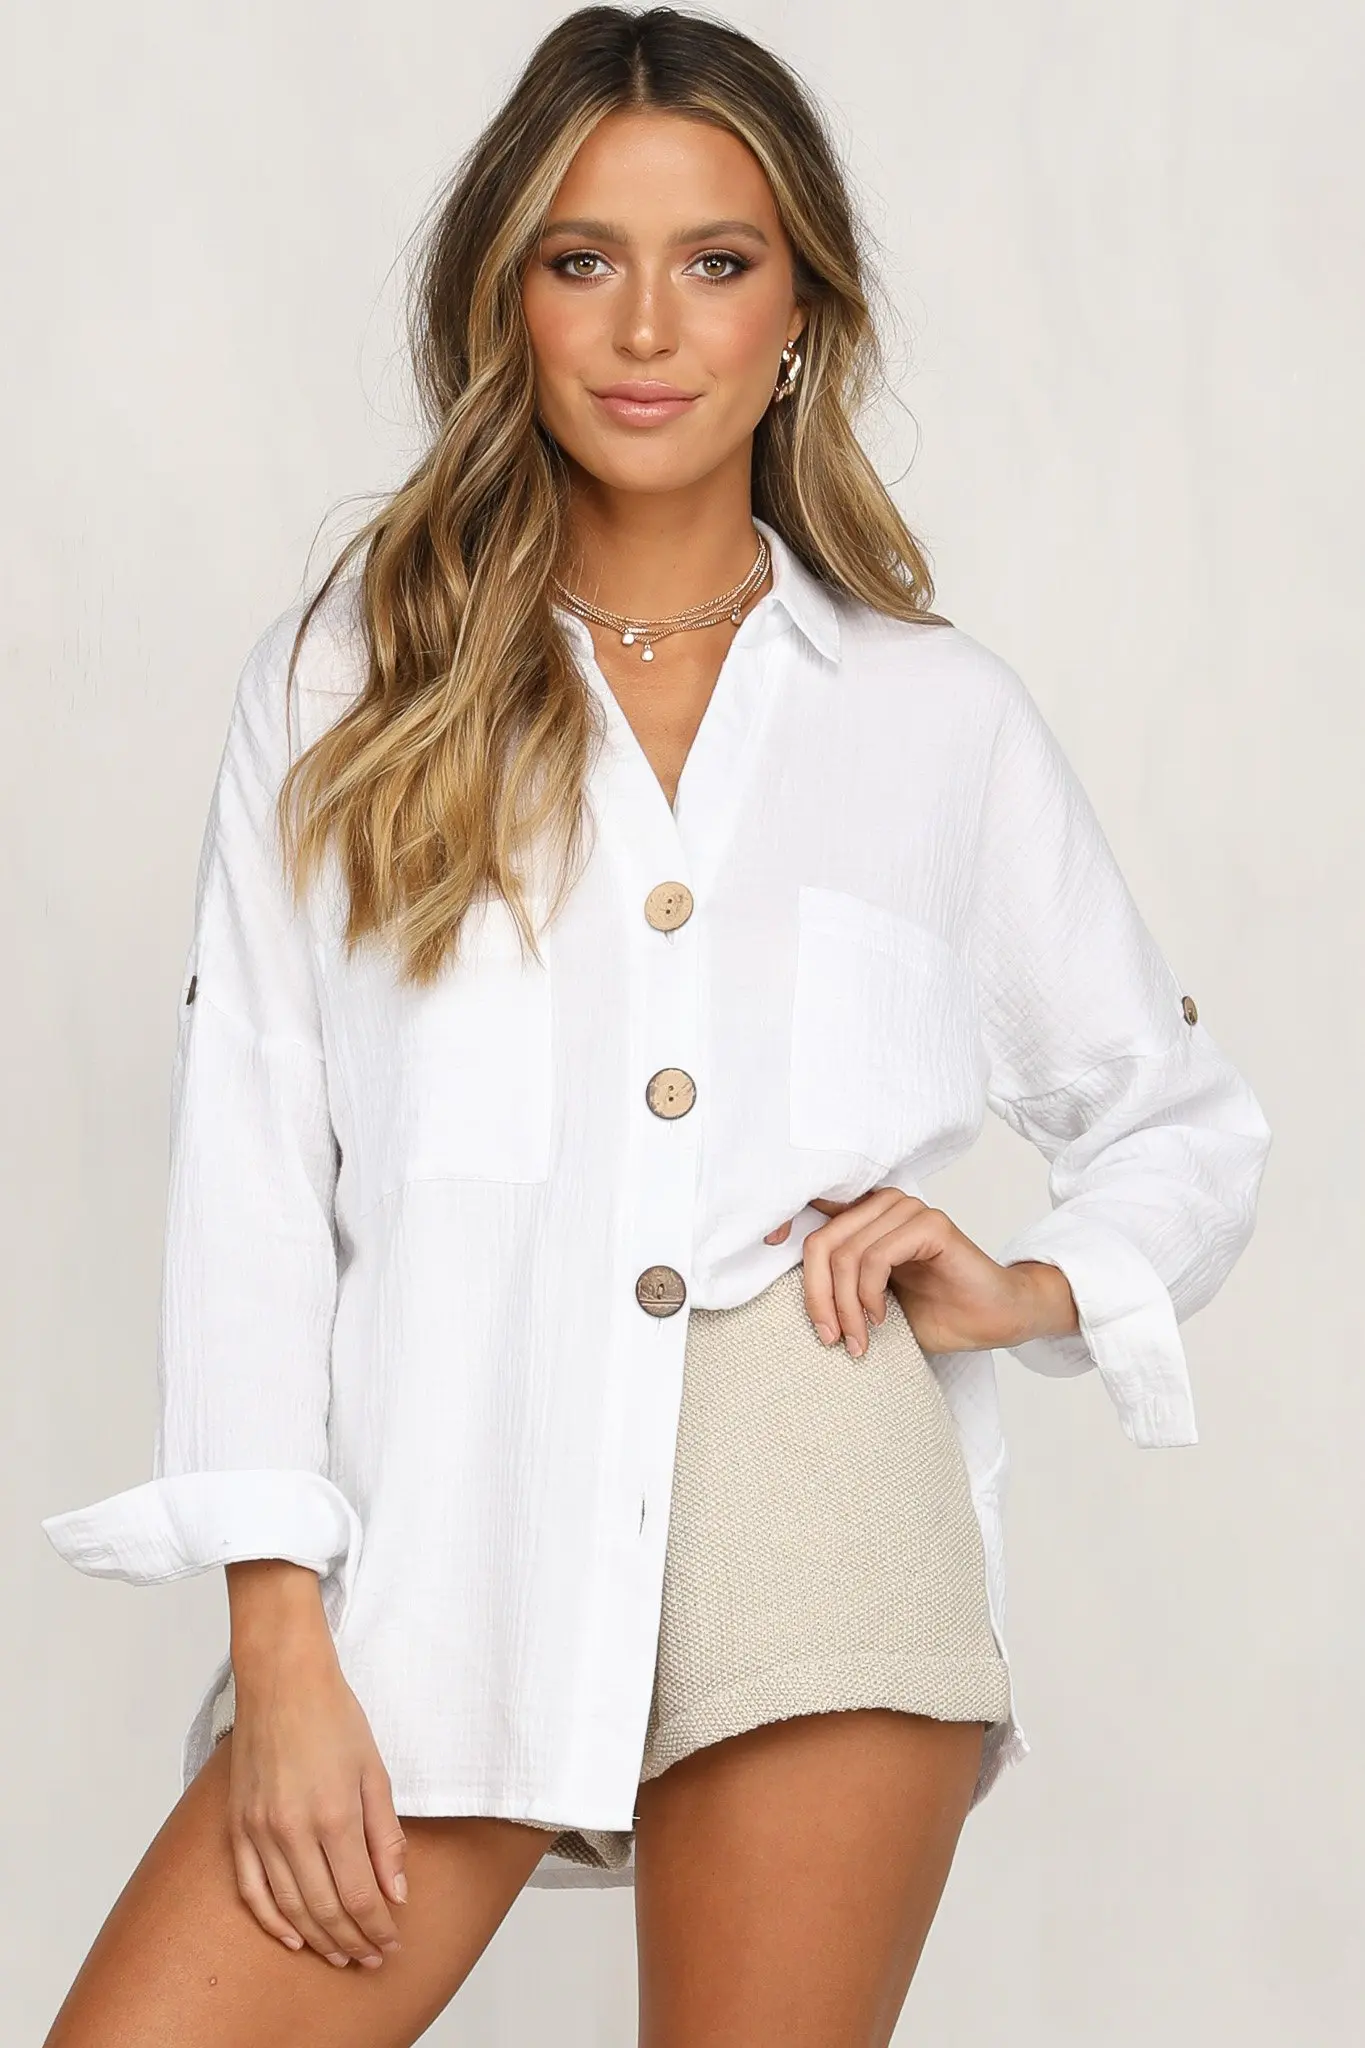 Casual Long Sleeve White Women Blouses And Shirts Clothing Manufacturer ...